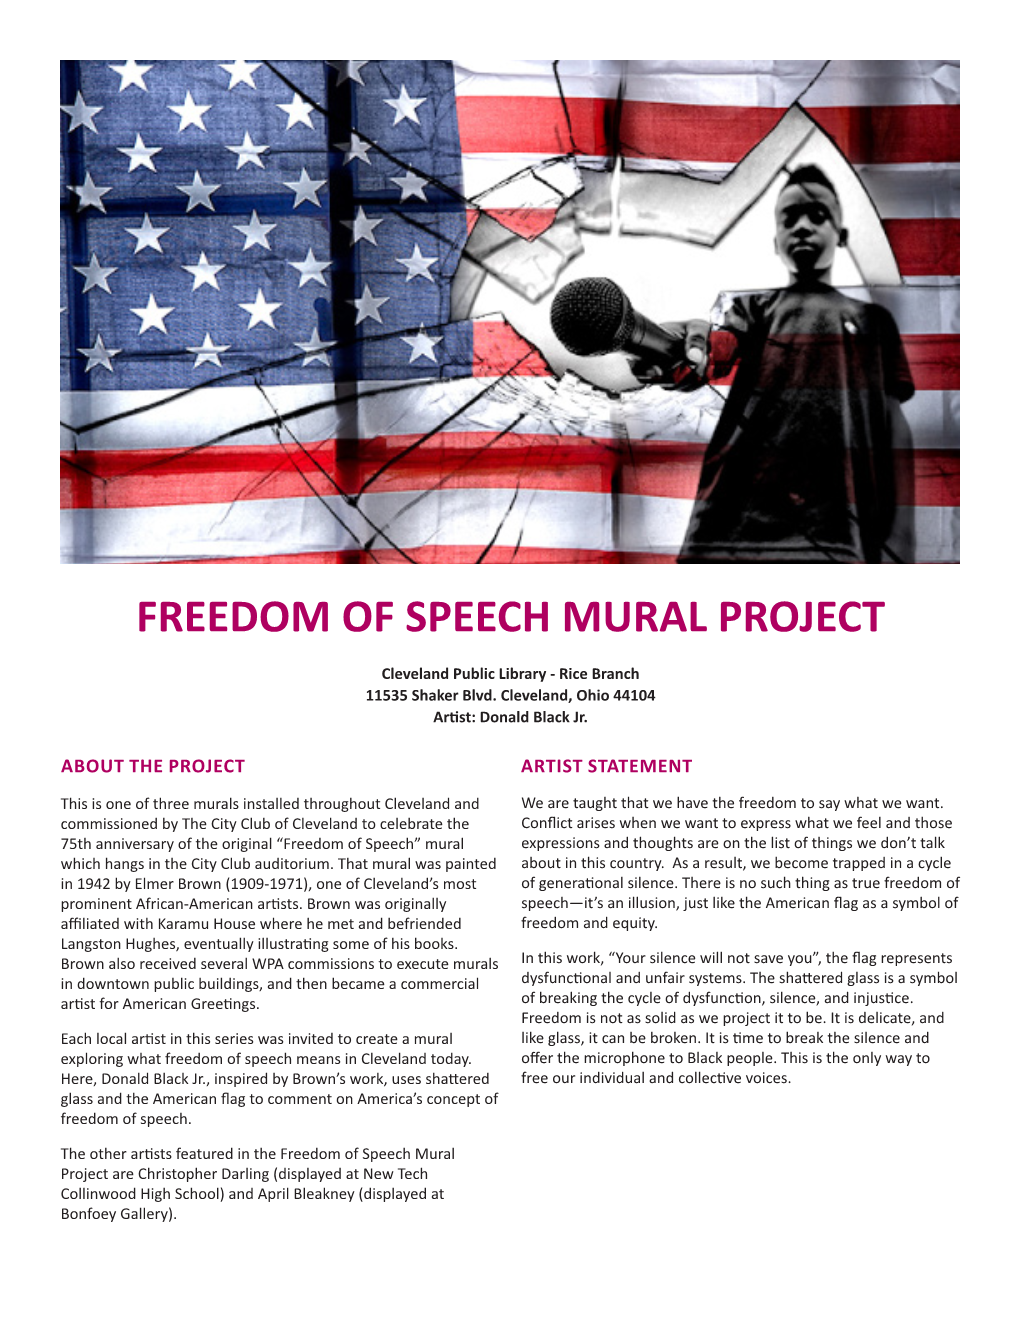 Freedom of Speech Mural Project